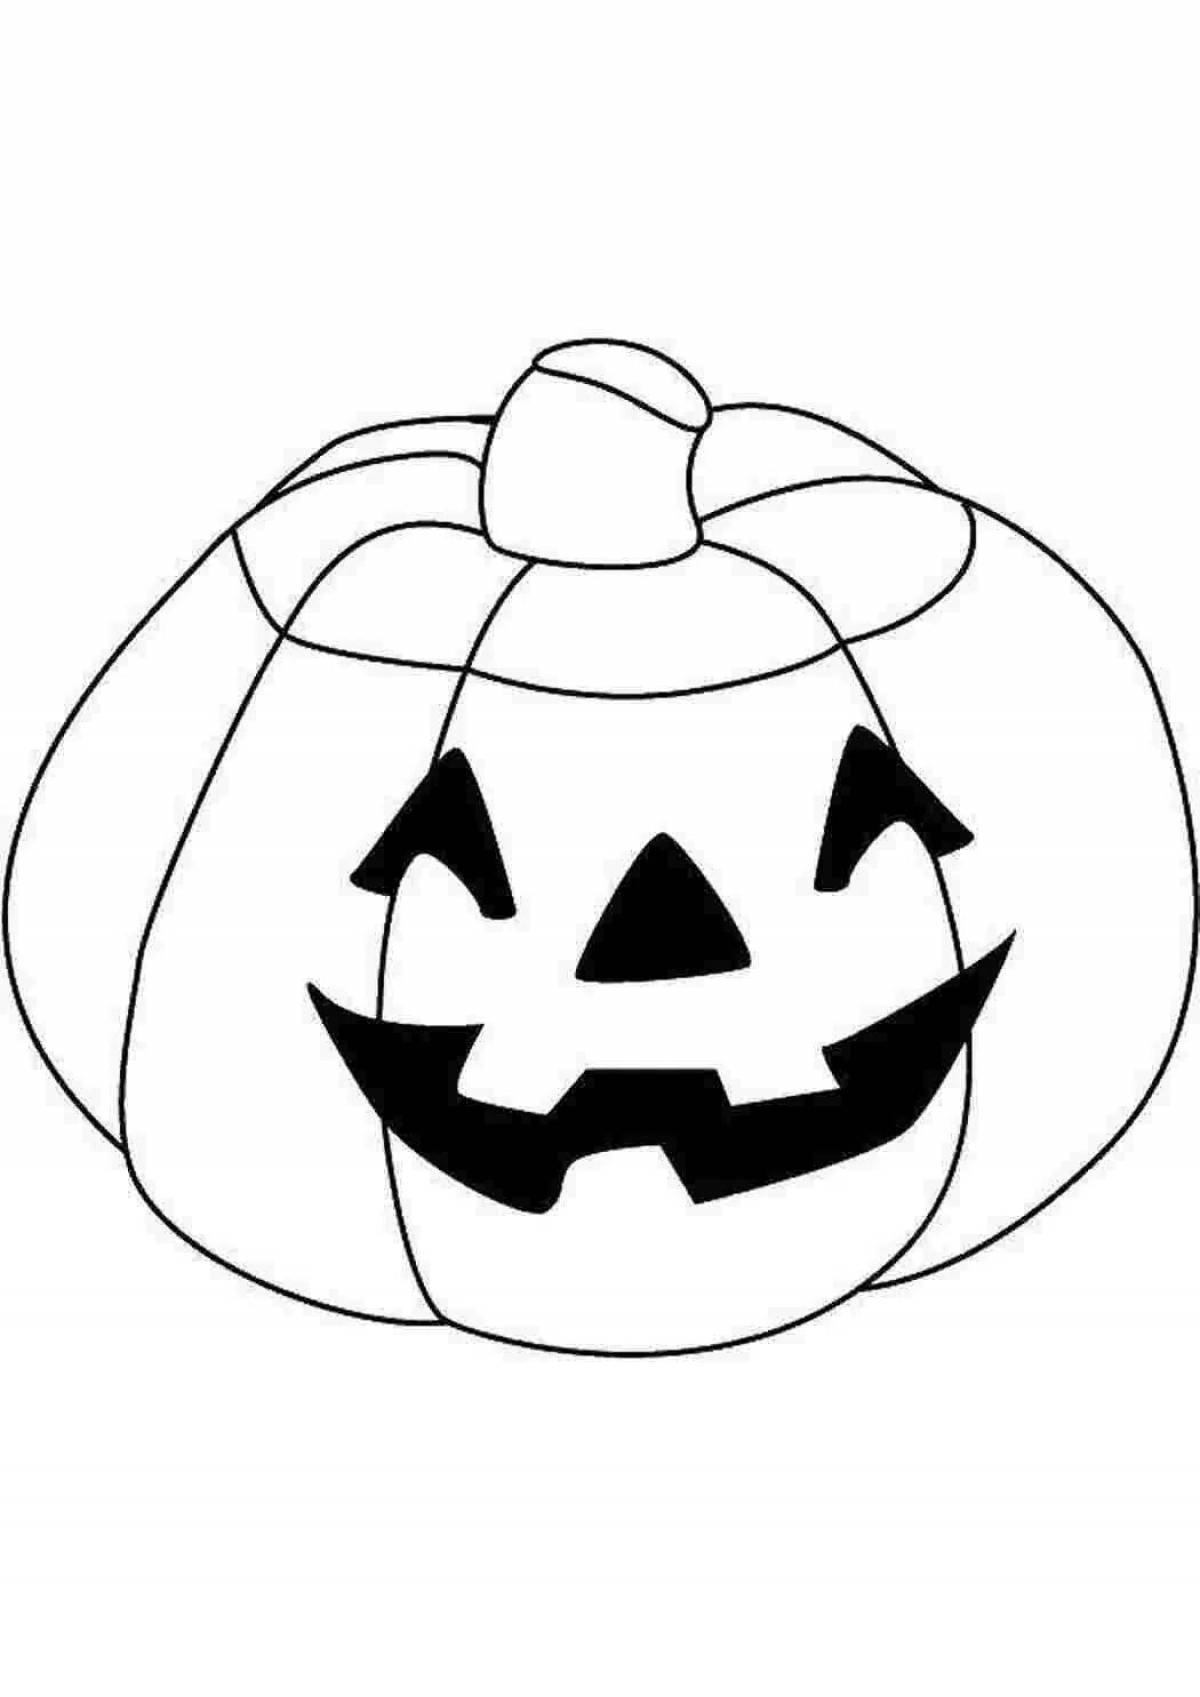 Amazing halloween pumpkin coloring page